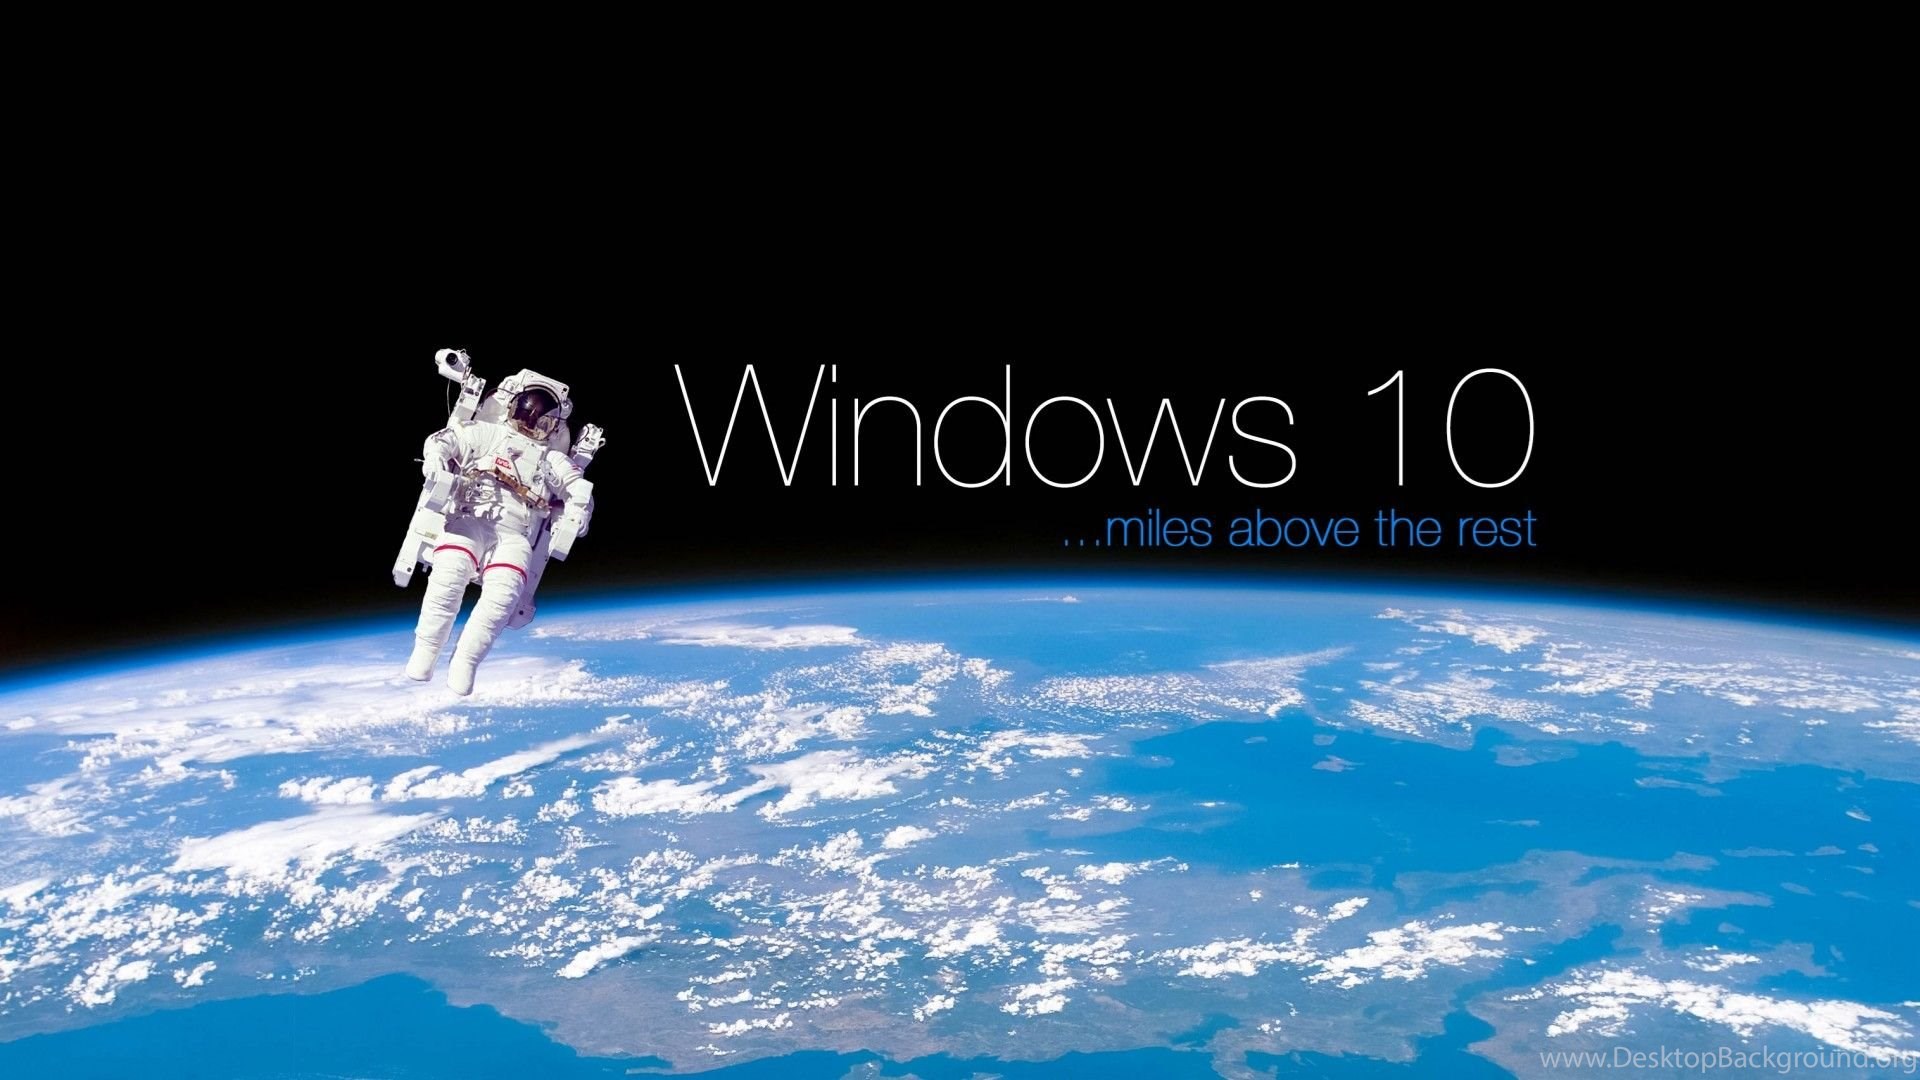 Windows 10 Space 4k Wallpapers 1920x1080 1080p Wallpapers